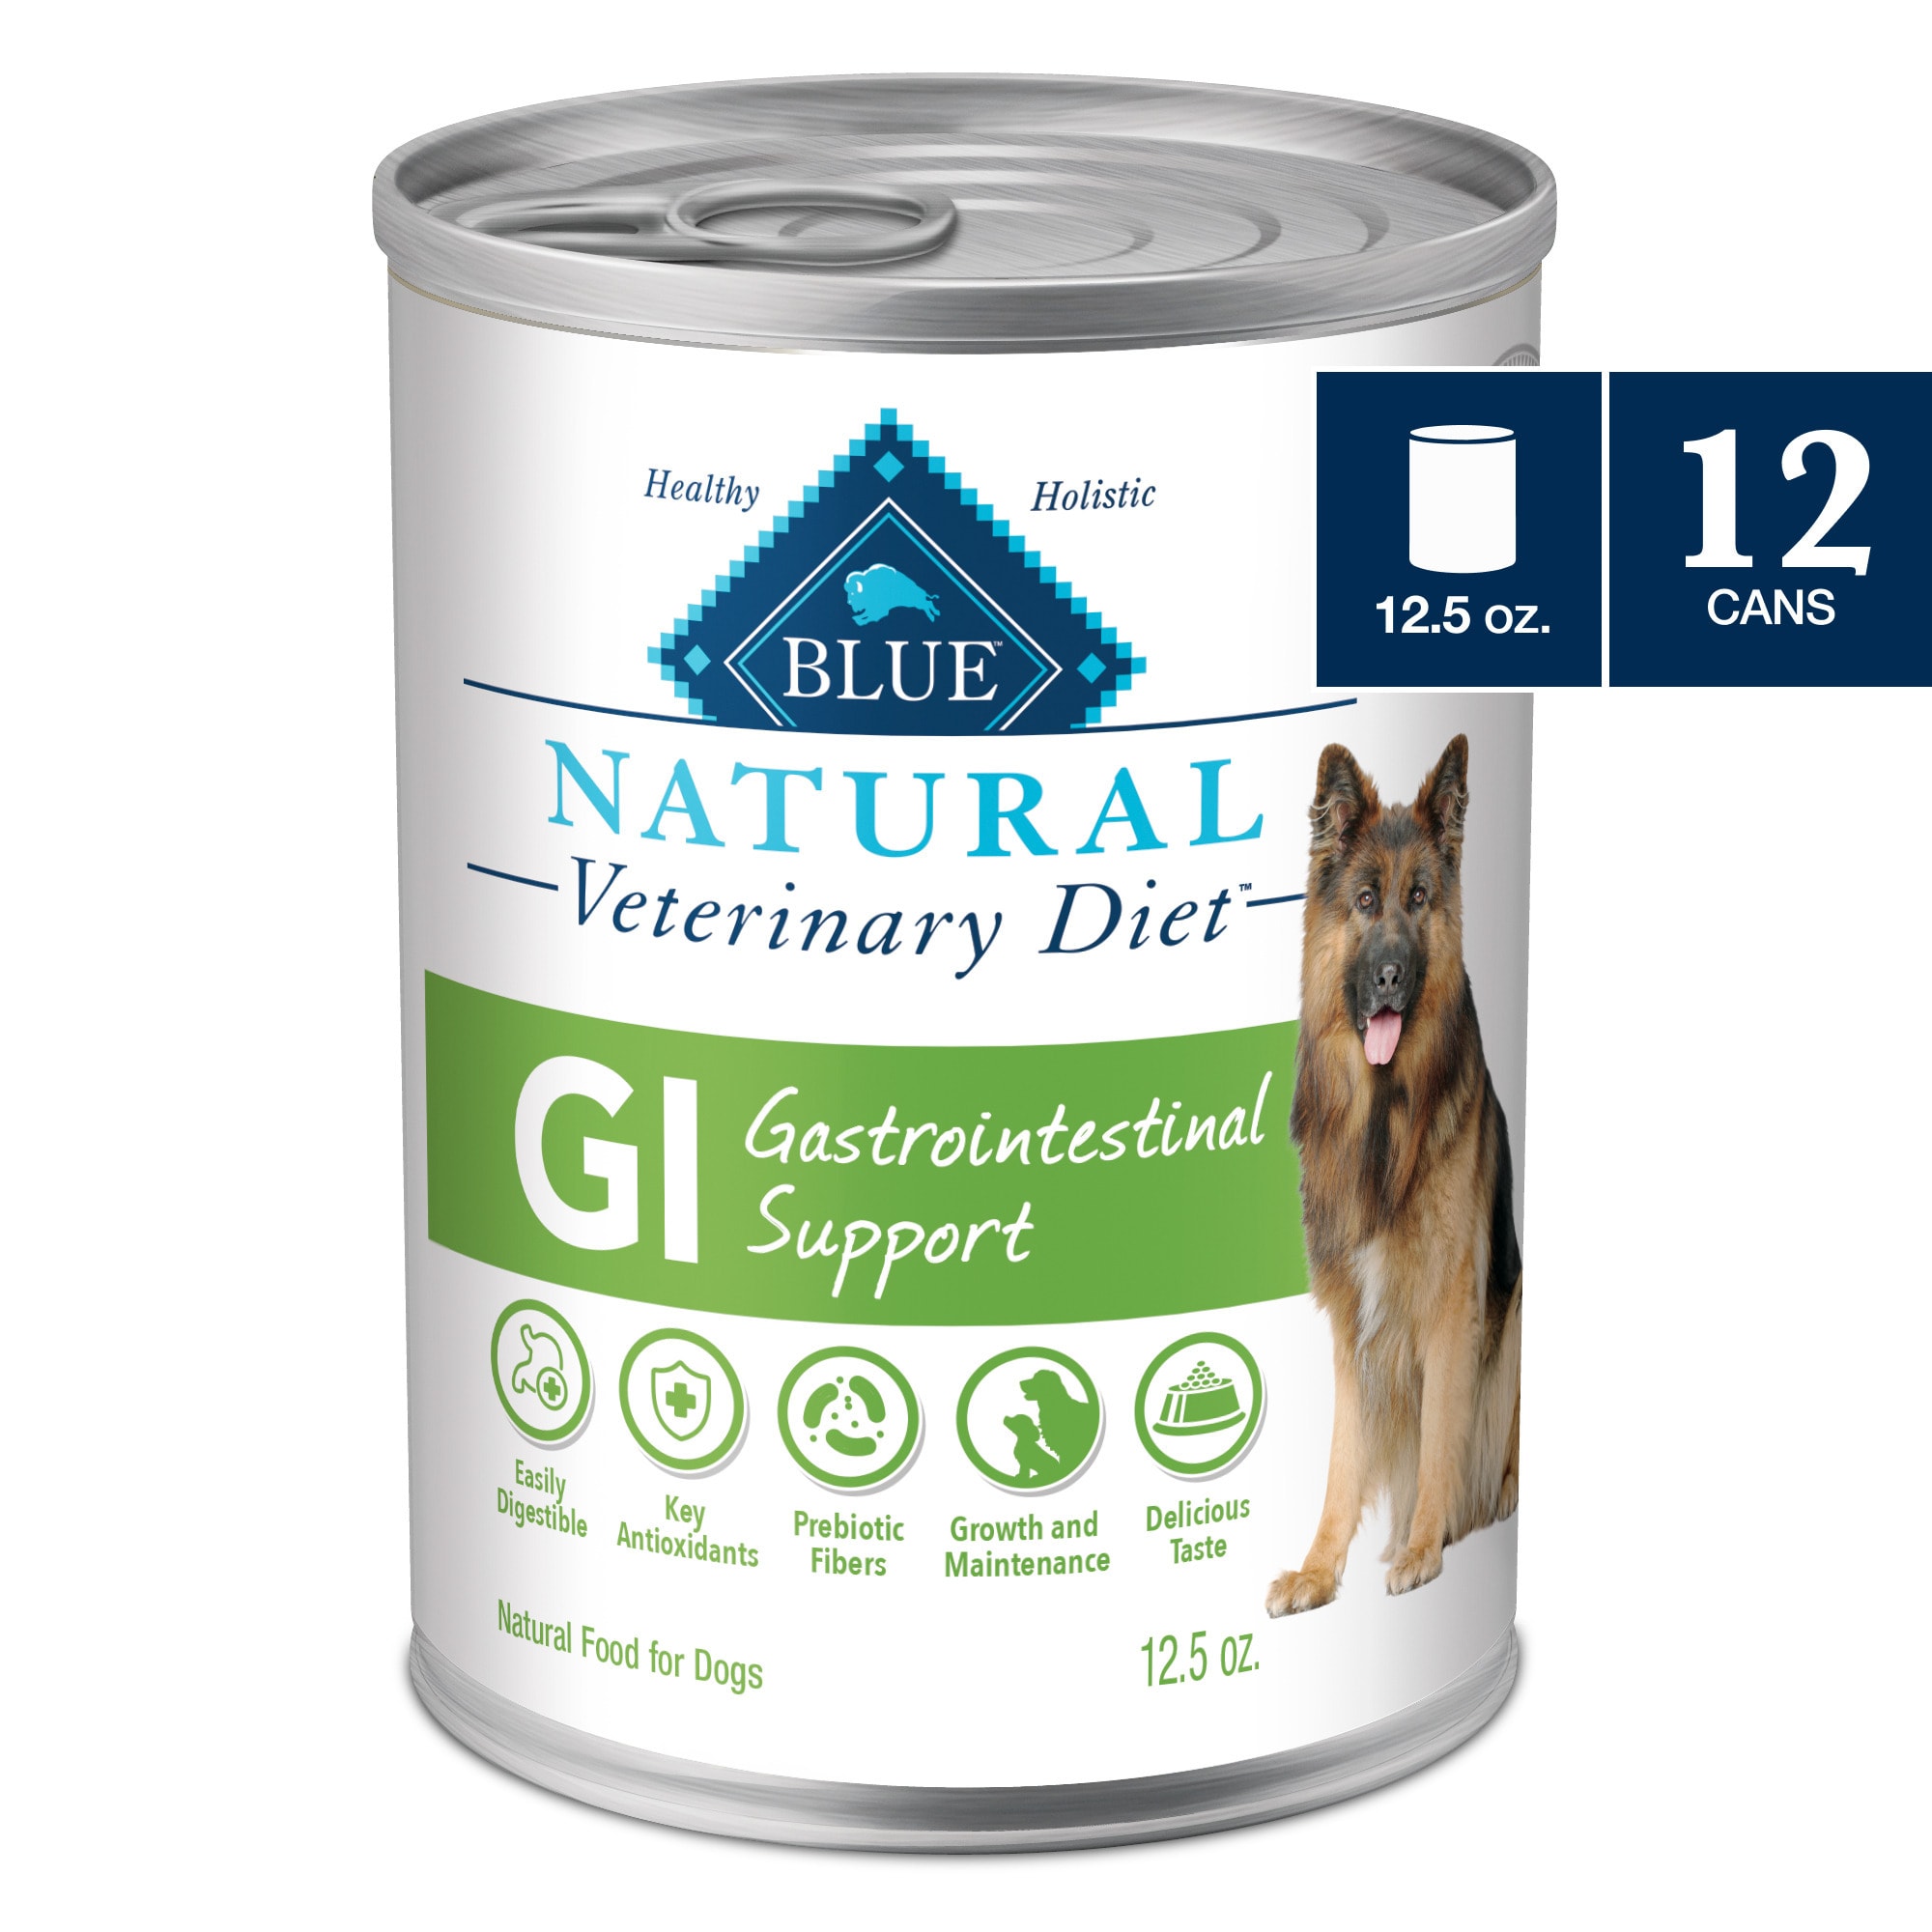 Blue Buffalo Natural Veterinary Diet GI Gastrointestinal Support Canned Chicken Dog Food